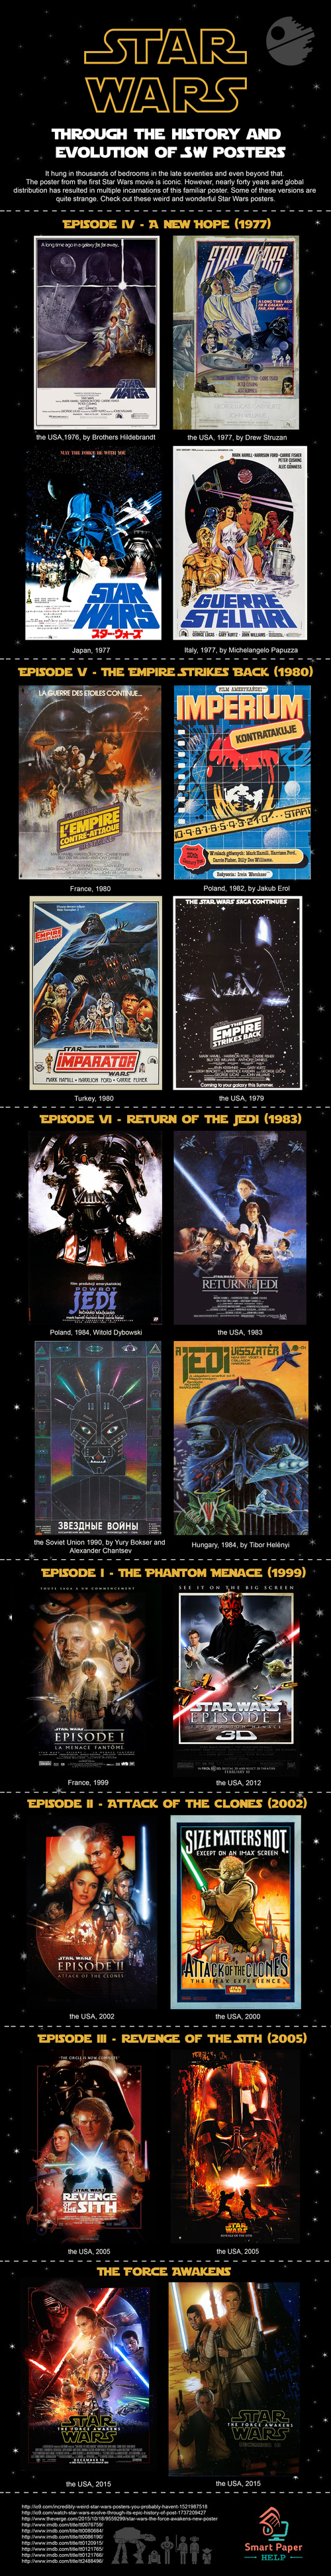 star_wars_posters